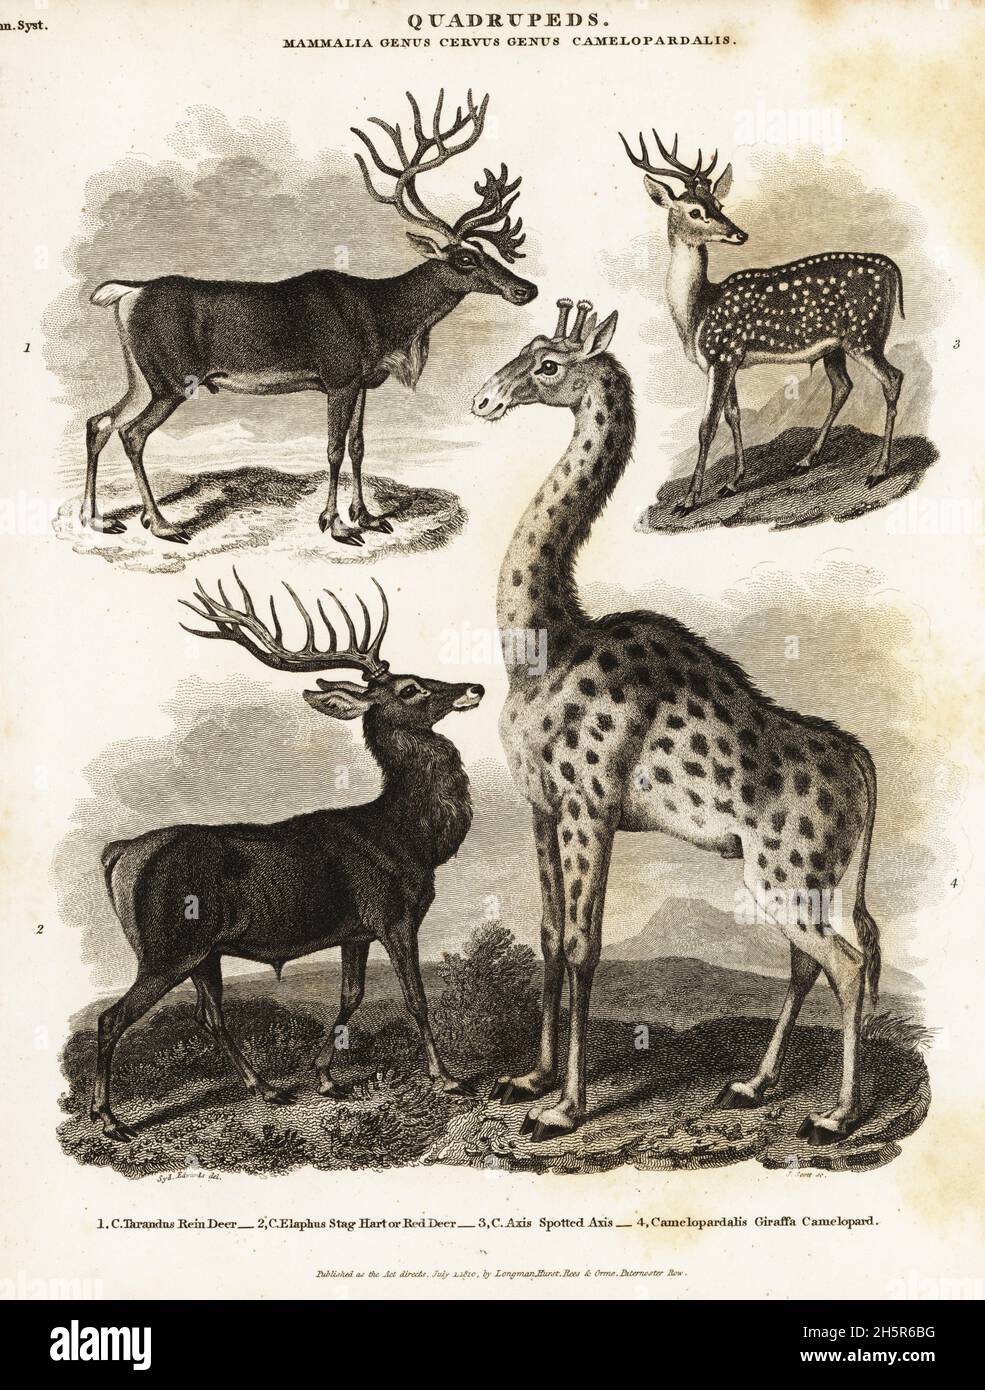 Reindeer, Rangifer tarandus, red deer, Cervus elaphus, spotted axis deer, Cervus axis, and giraffe, Cervus camelopardalis. Rein deer, Cervus tarandus, camelopard, Camelopardalis giraffa. Copperplate engraving by J. Scott after an illustration by Sydenham Edwards from Abraham Rees' Cyclopedia or Universal Dictionary of Arts, Sciences and Literature, Longman, Hurst, Rees and Orme, London, 1810. Stock Photo